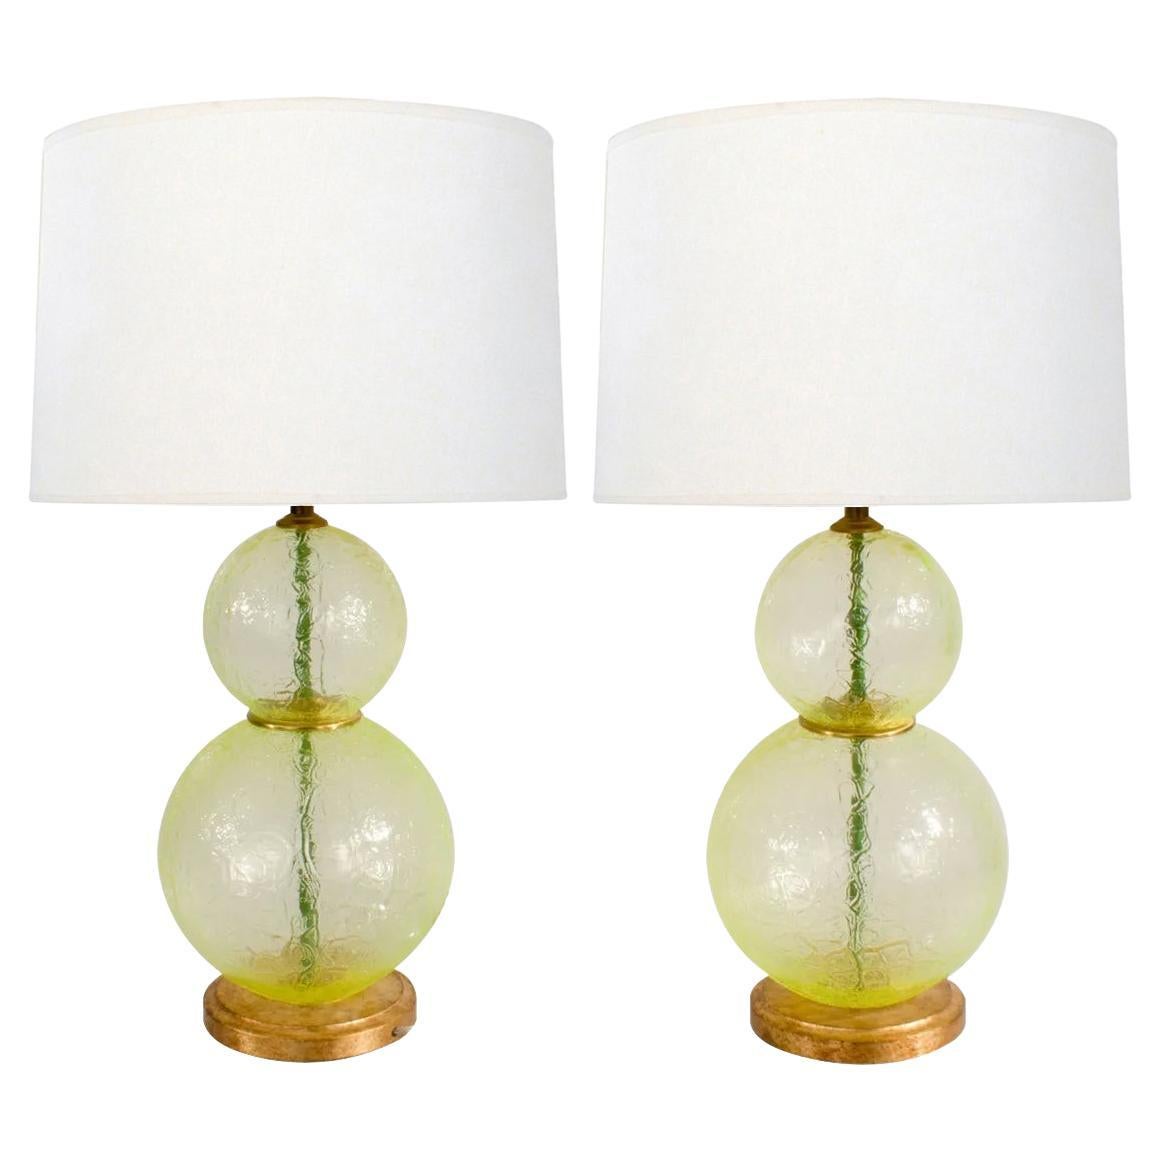 A Translucent & Textured Pair of Murano Stacked Chartreuse Glass Sphere Lamps  For Sale